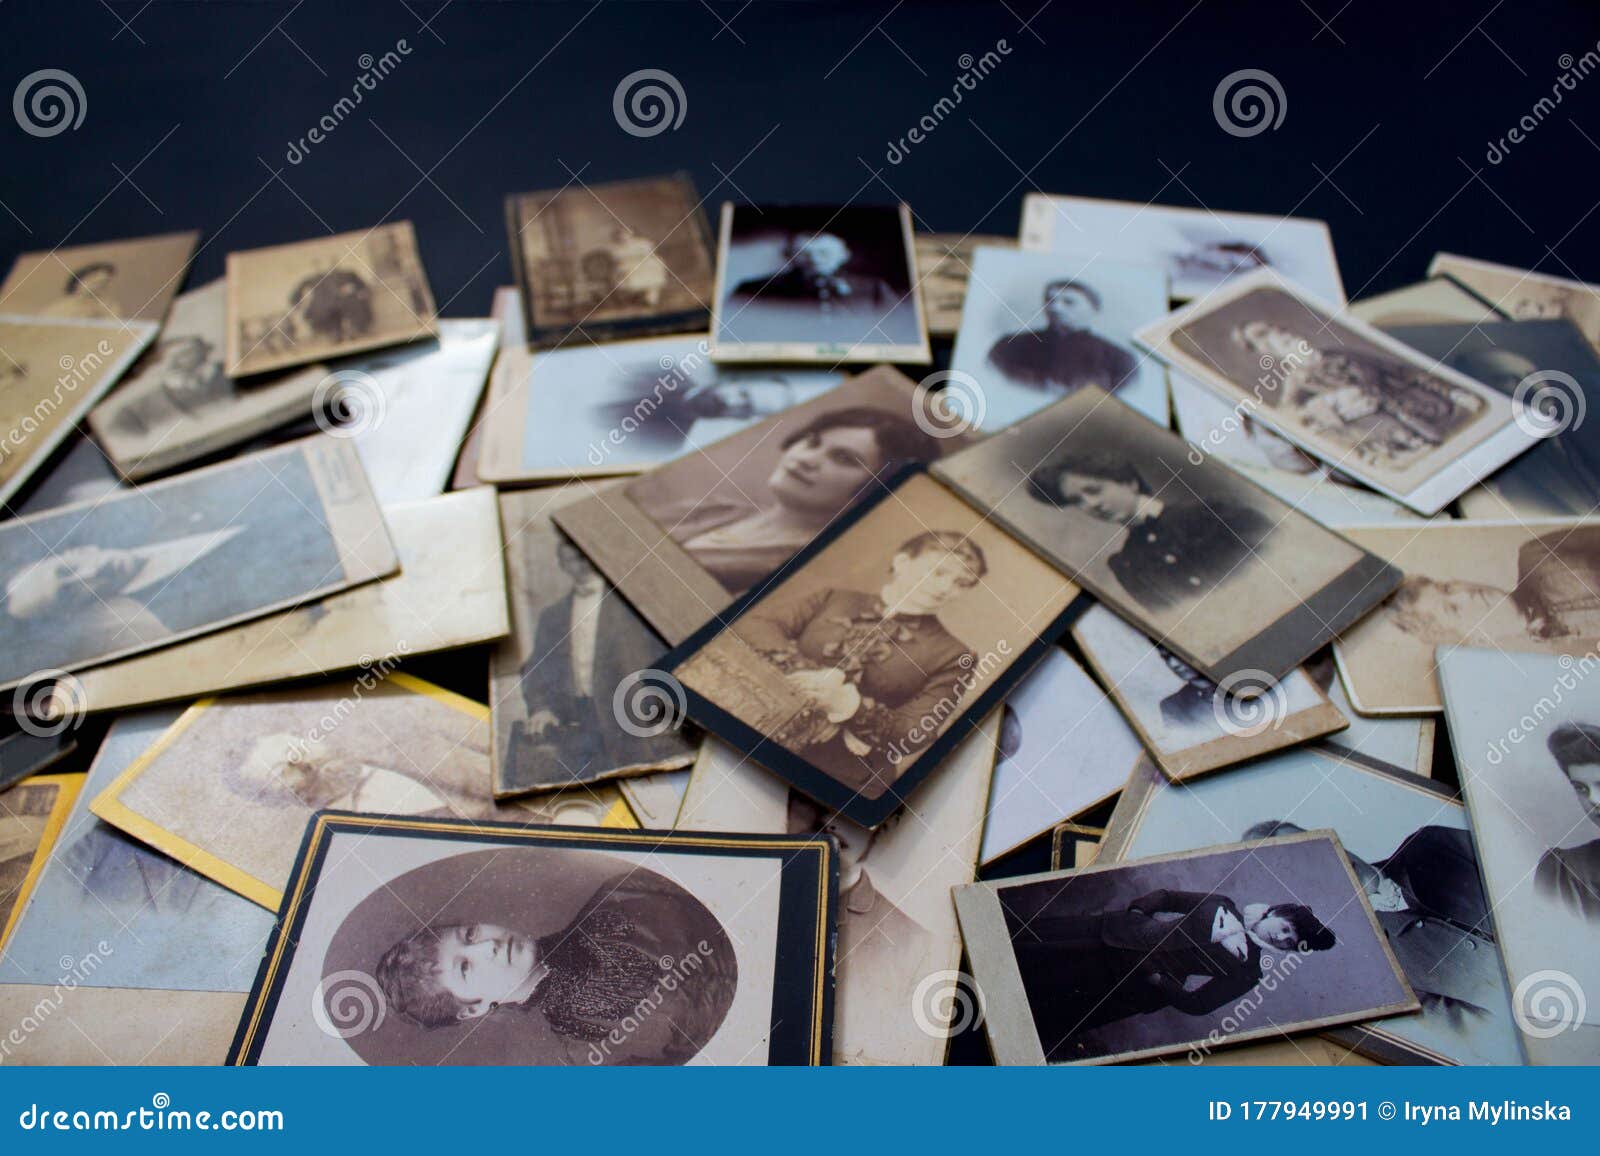 stack of original photos circa 1870-1920 with copy space for your logo or text. genealogy research